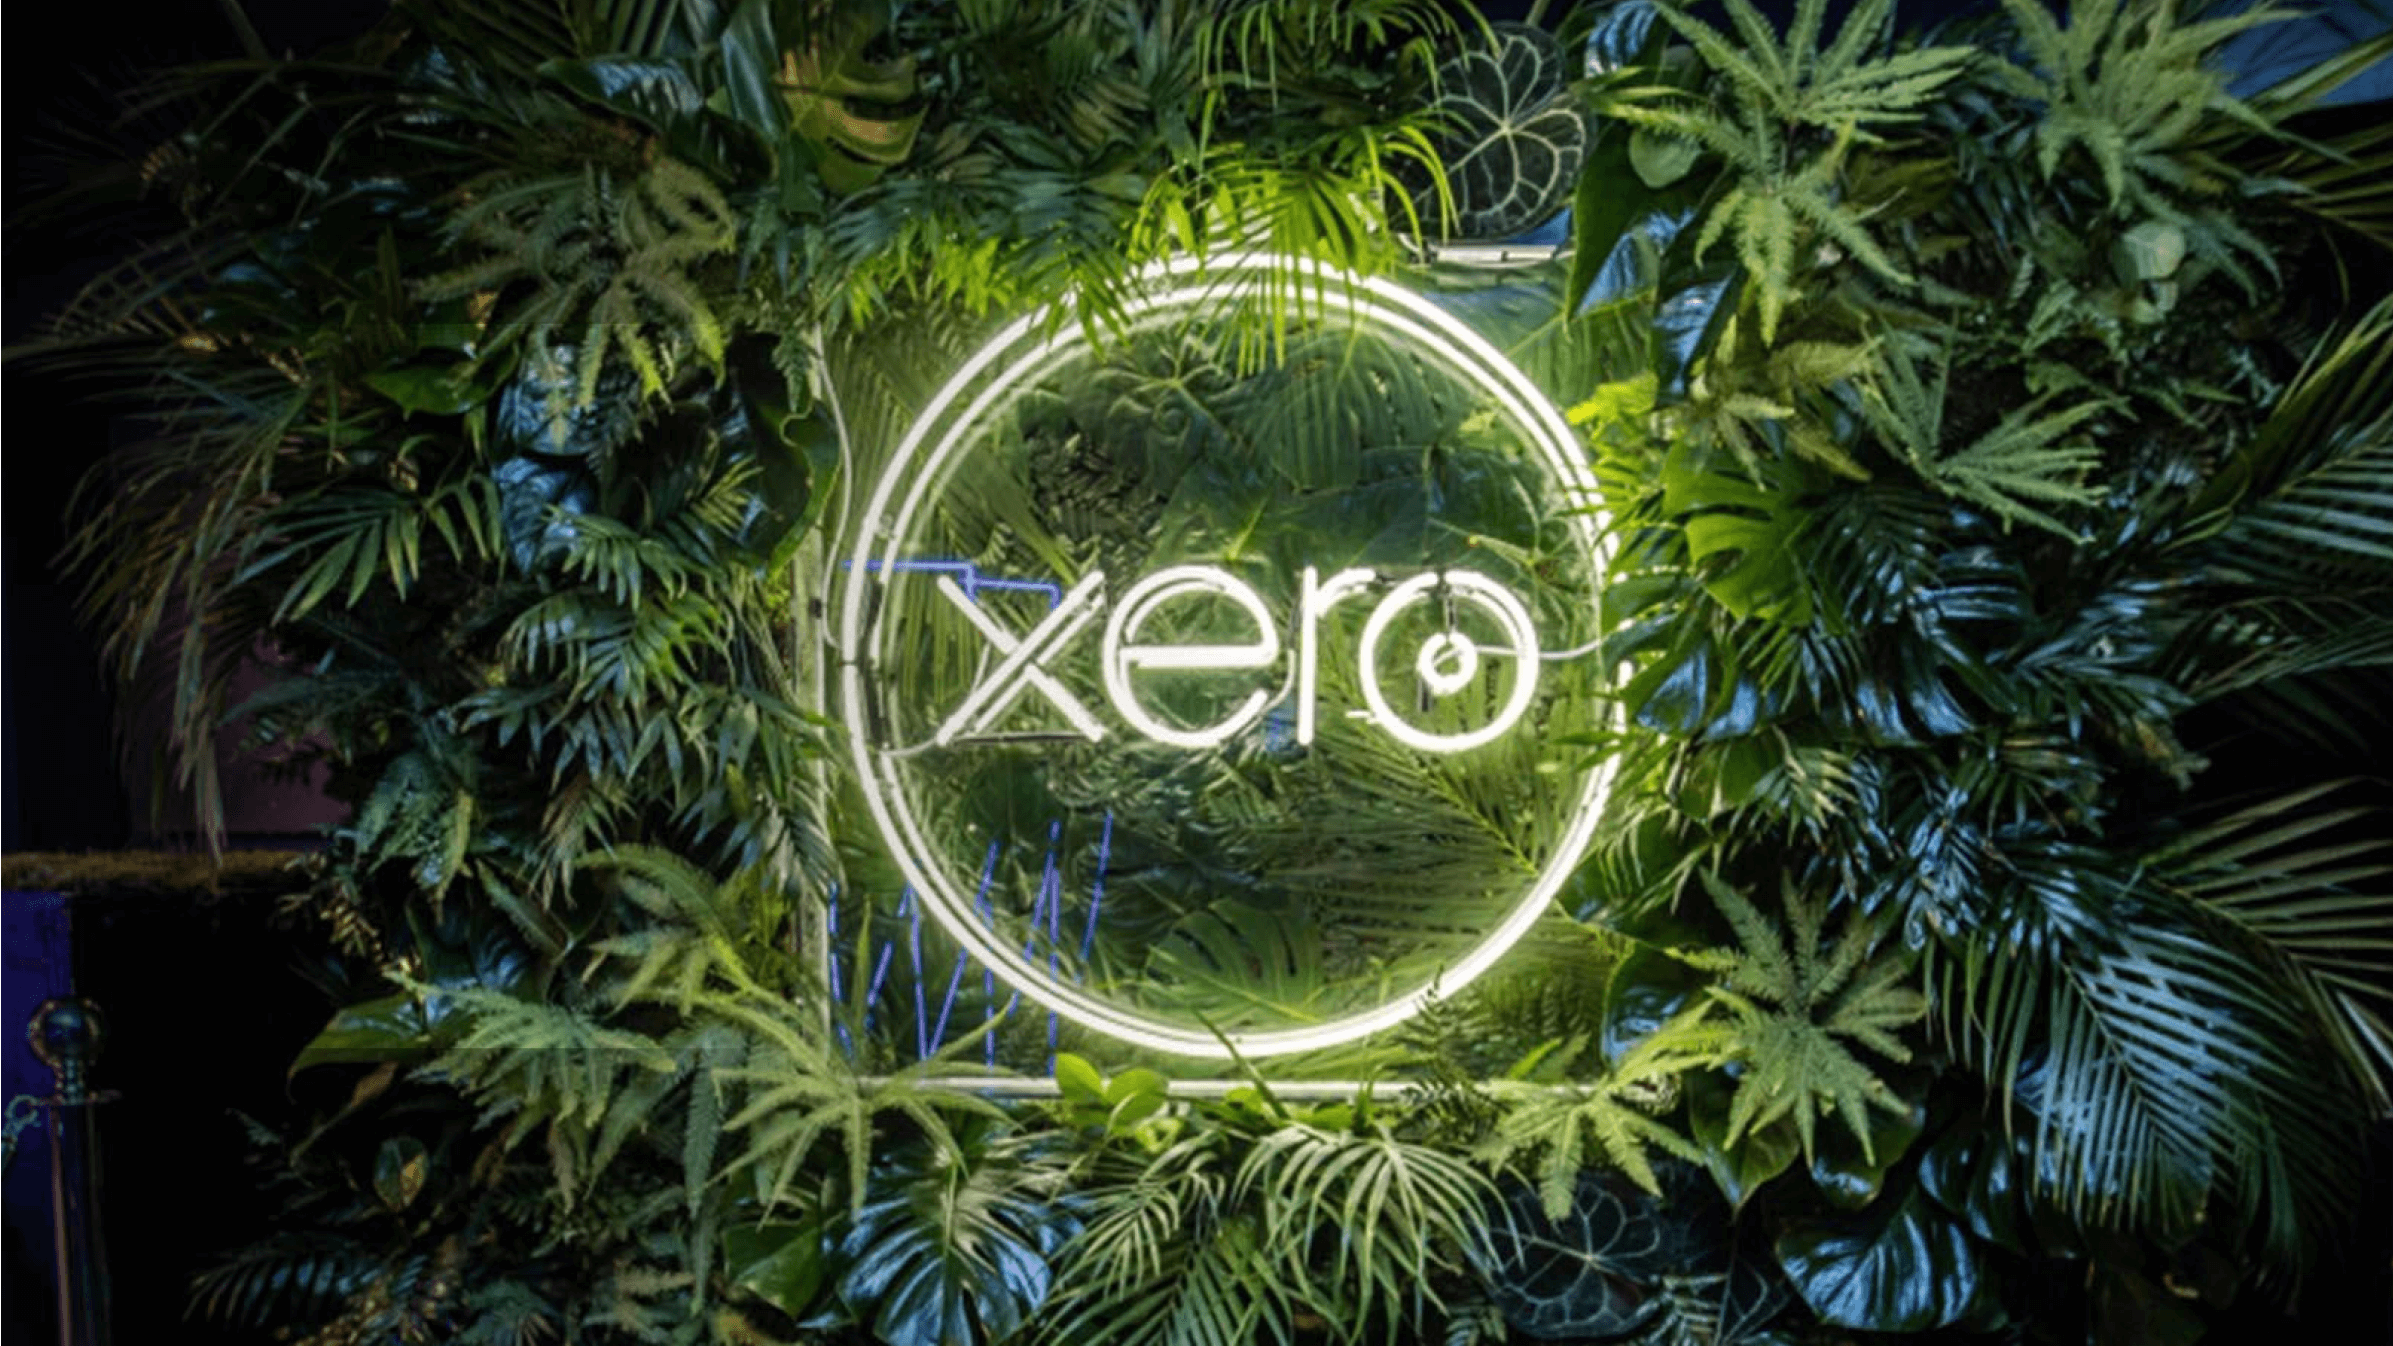 A Xero logo lights up against a backdrop of greenery in celebration of the many awards Xero has received. 